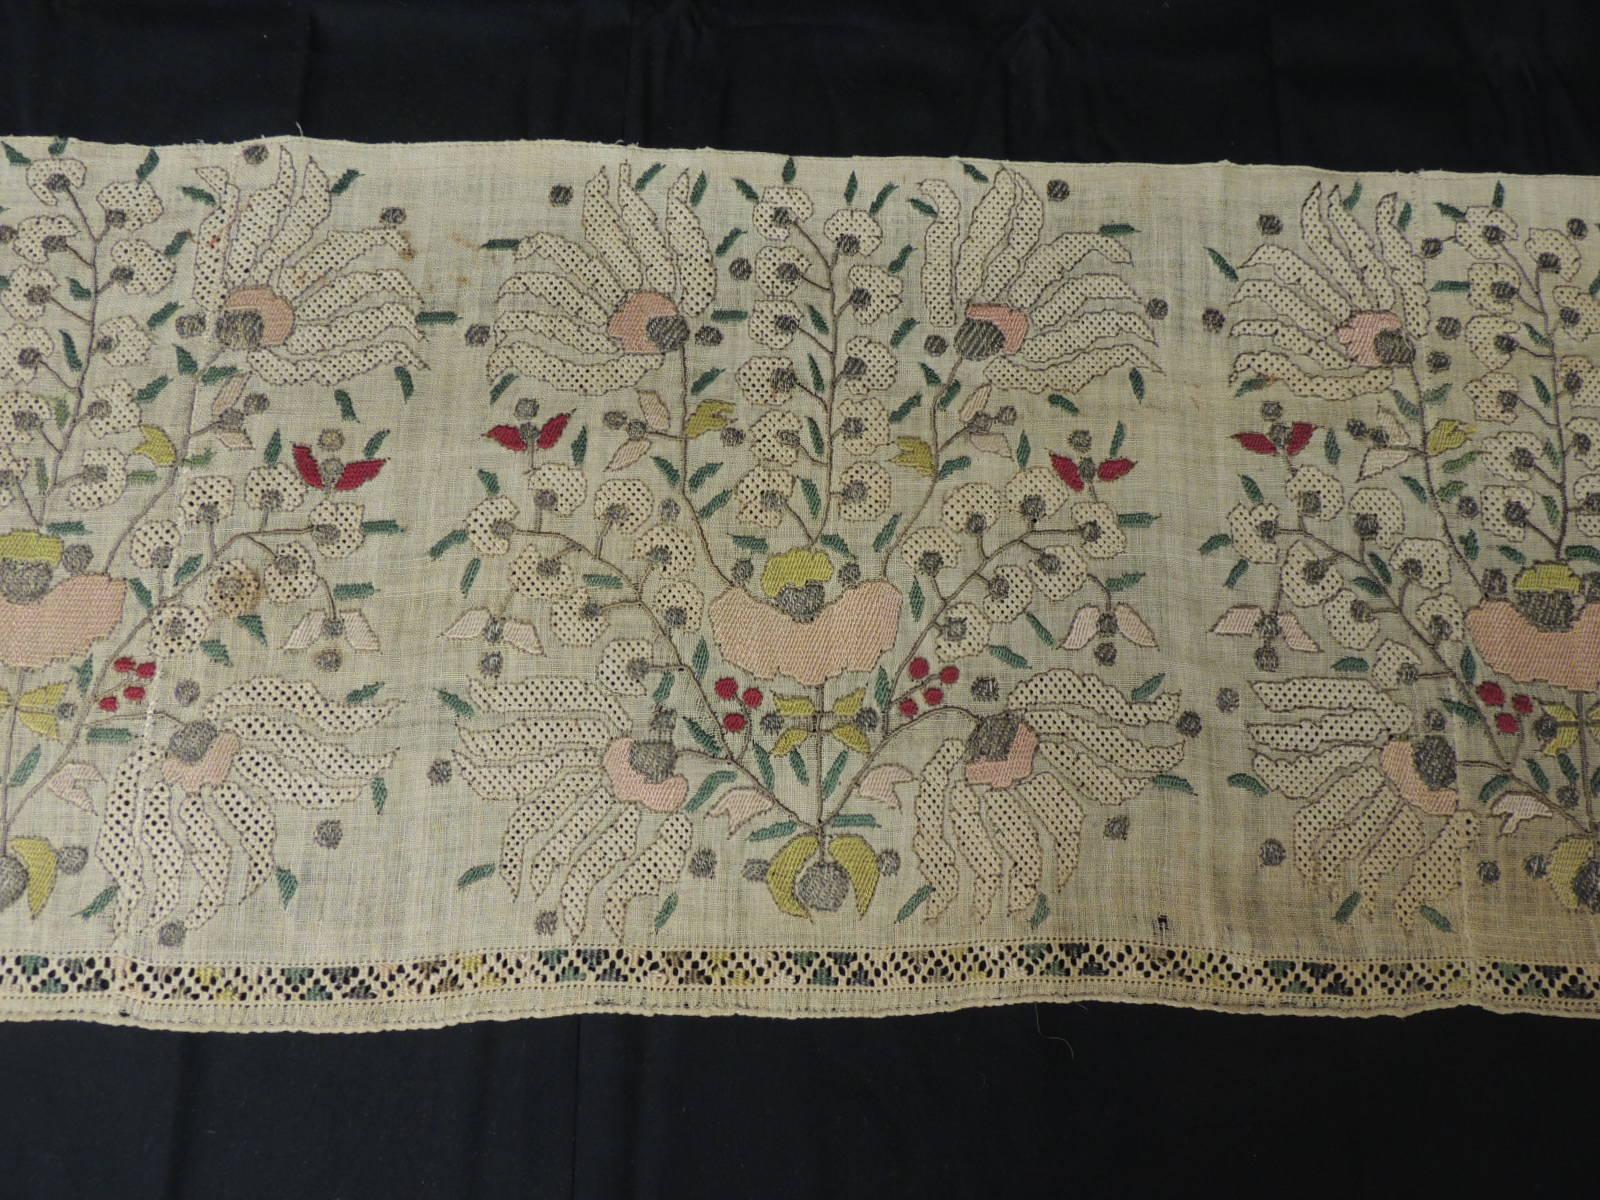 Large Turkish embroidered mesh floral textile.
Woven mesh with embroidered flowers and metallic silver threads details.
In shades of natural, peach, silver, pink, orange and red.
Ideal to frame or make a pillow.
Size: 13